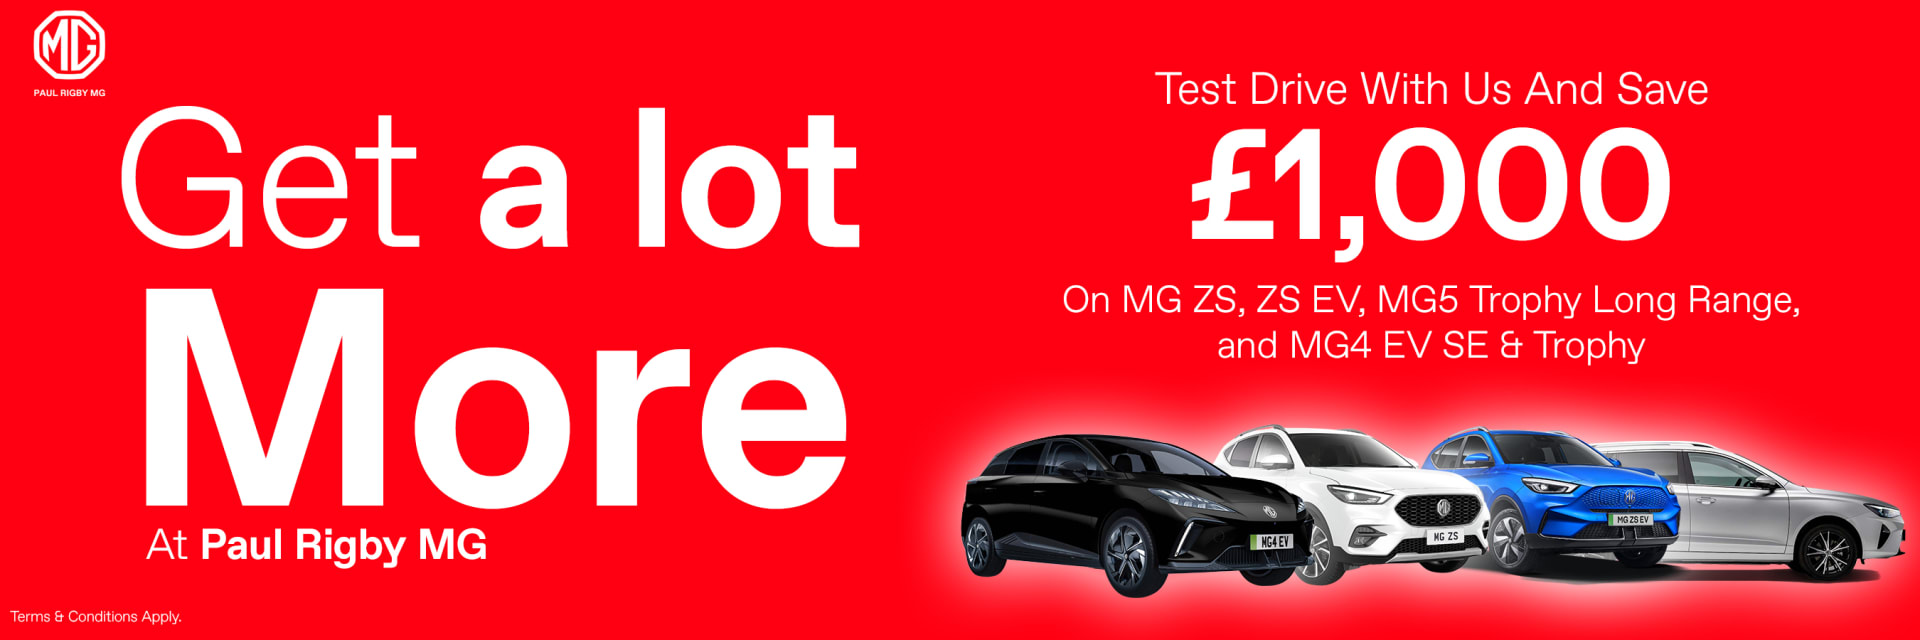 £1,000 when you test drive